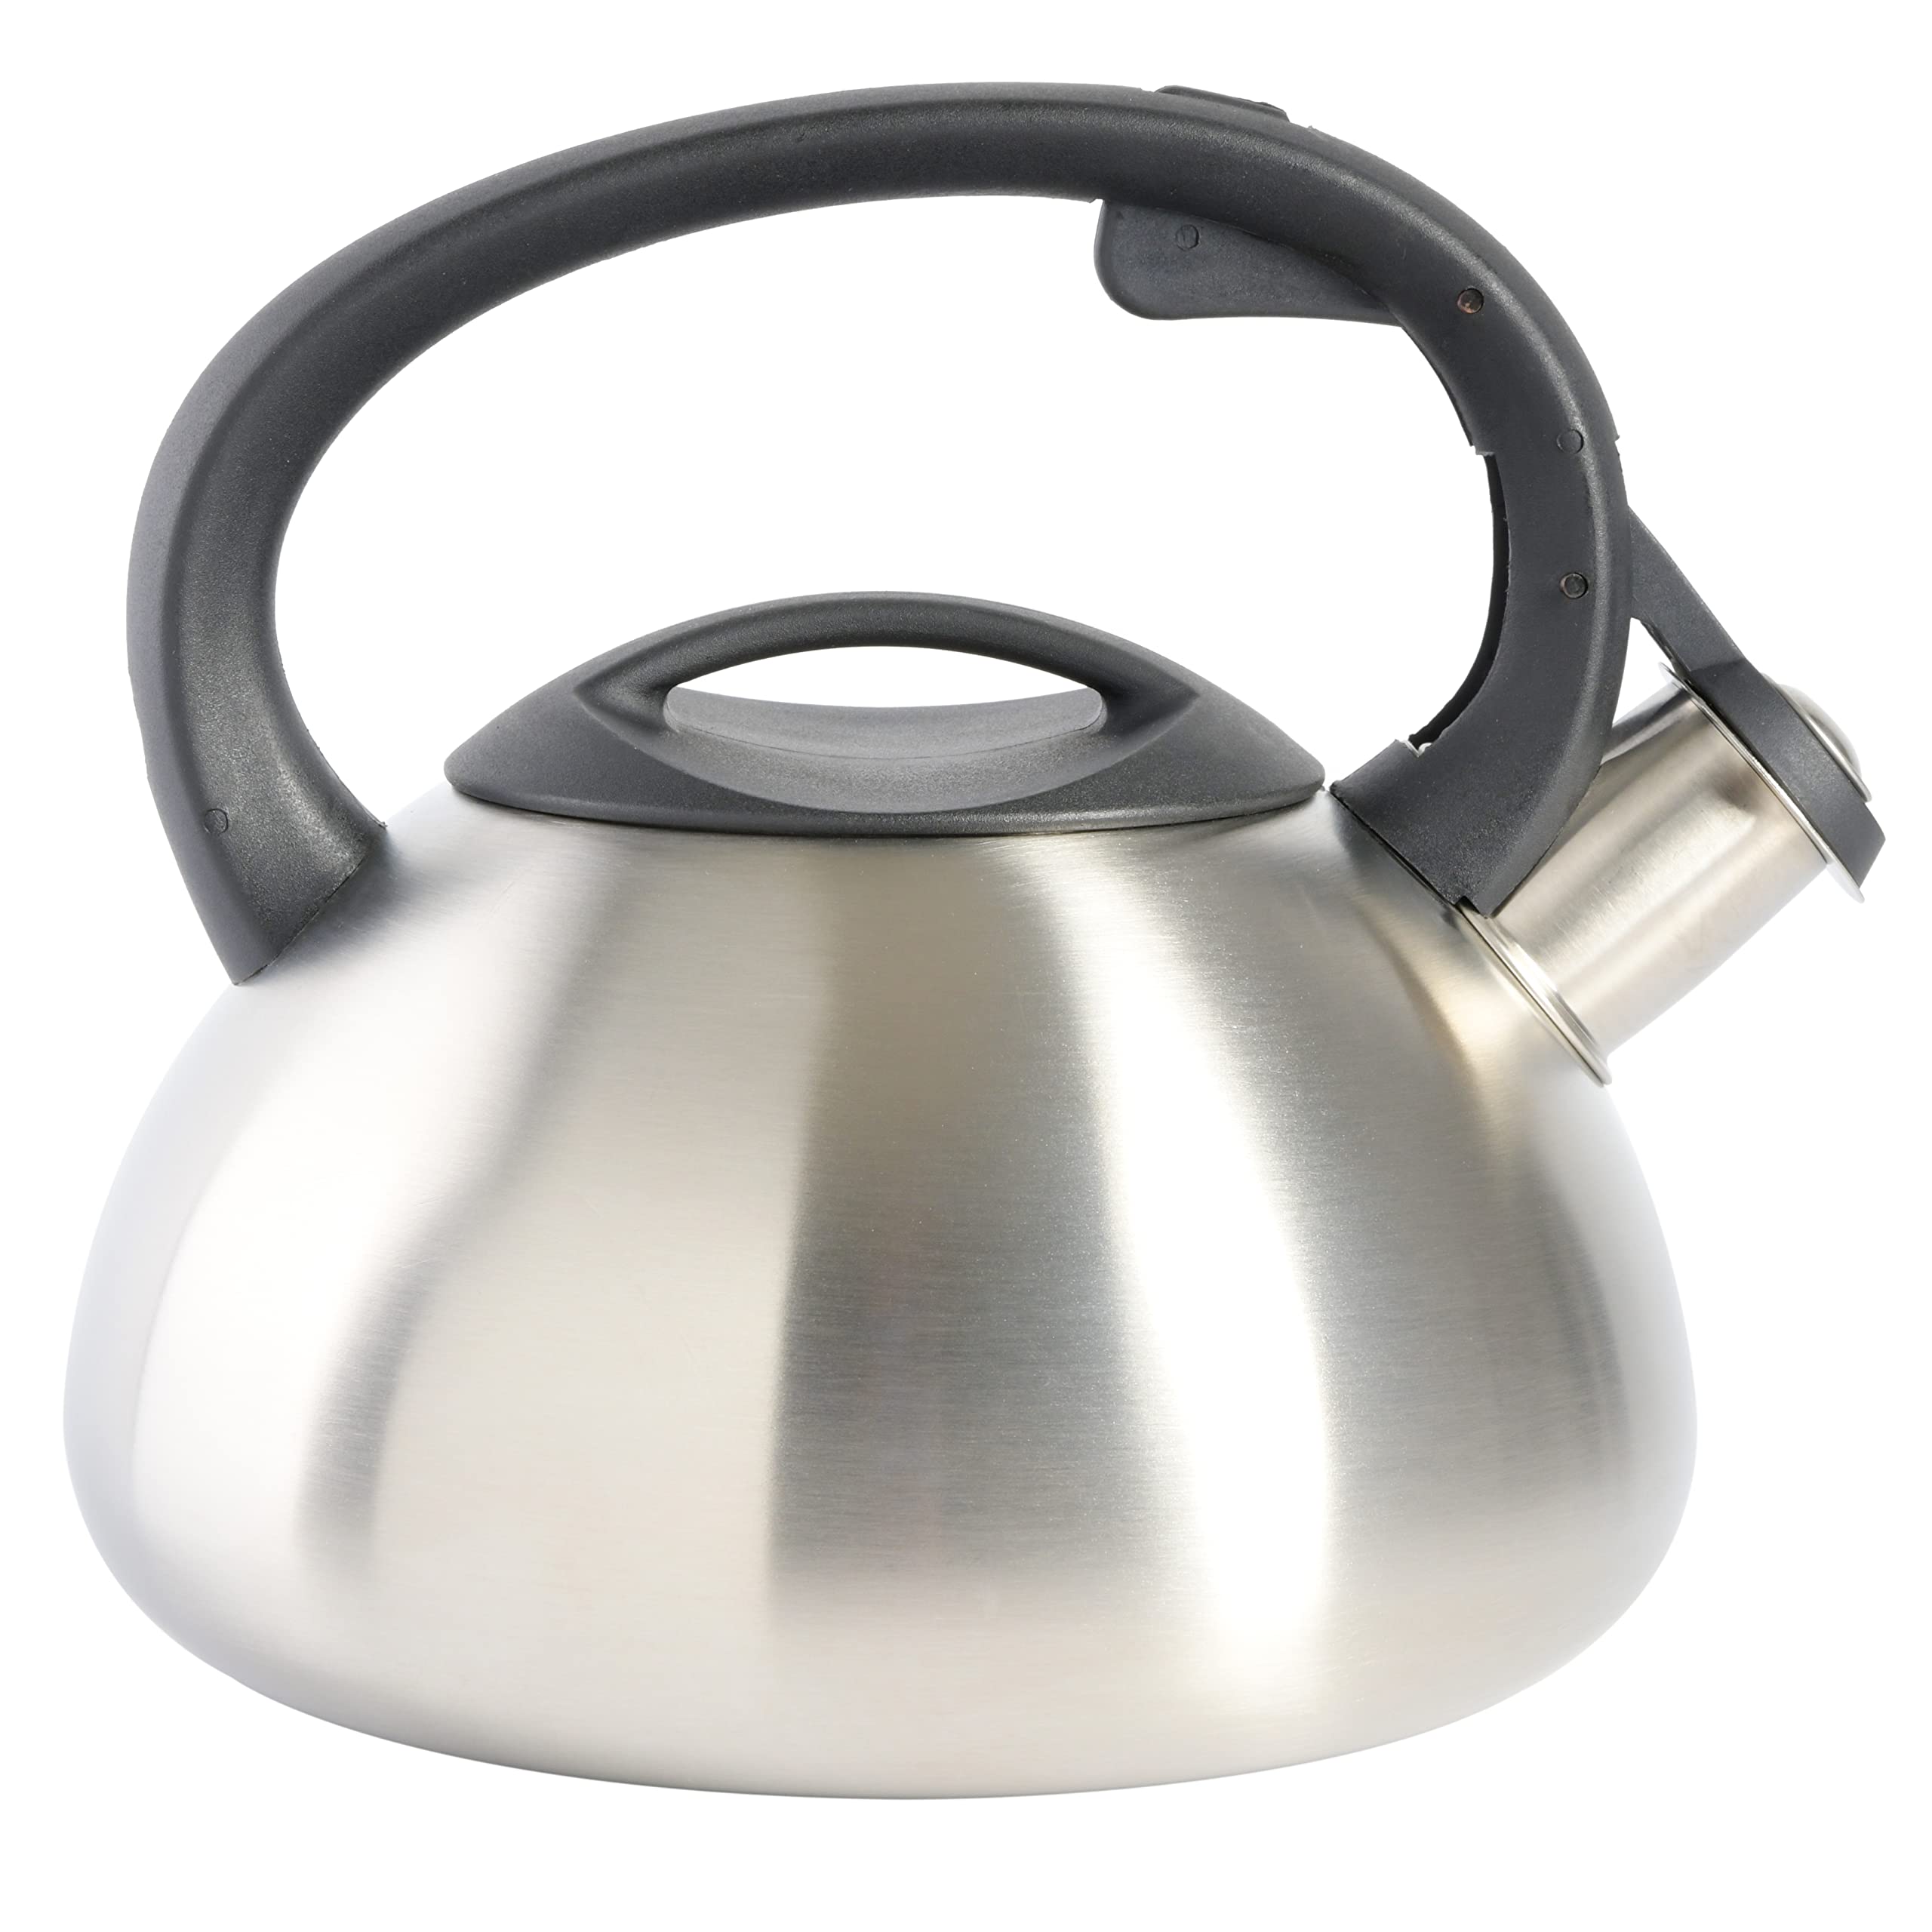 Mr Coffee Harpwell Stainless Steel Whistling Tea Kettle, 1.8-Quart, Brushed Stainless Steel